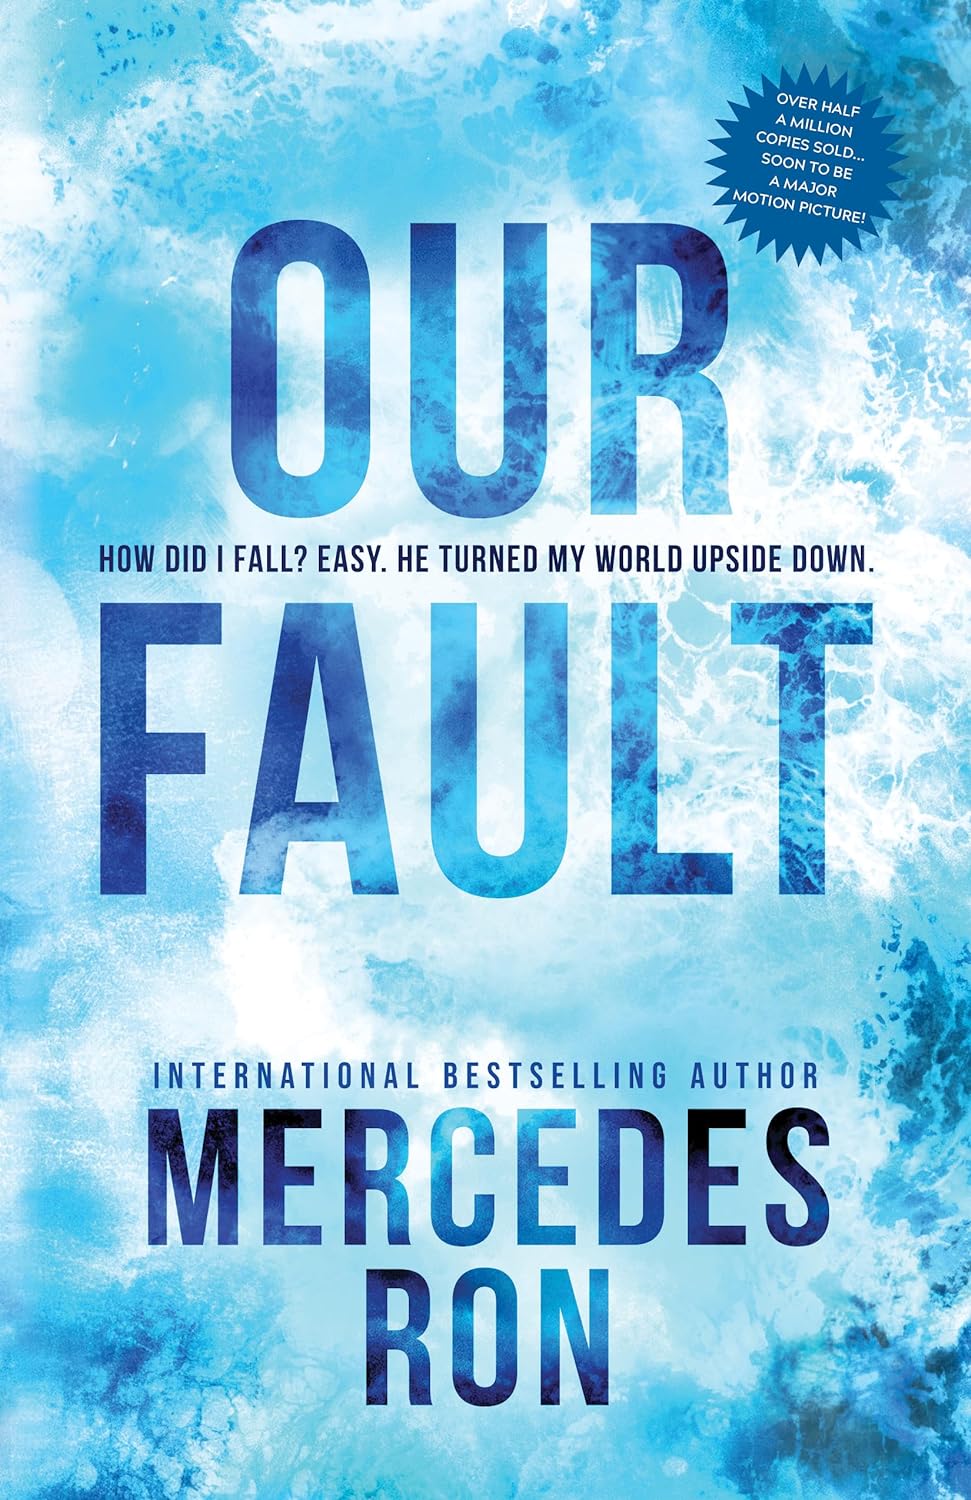 Our Fault (Culpable, #3) by Mercedes Ron